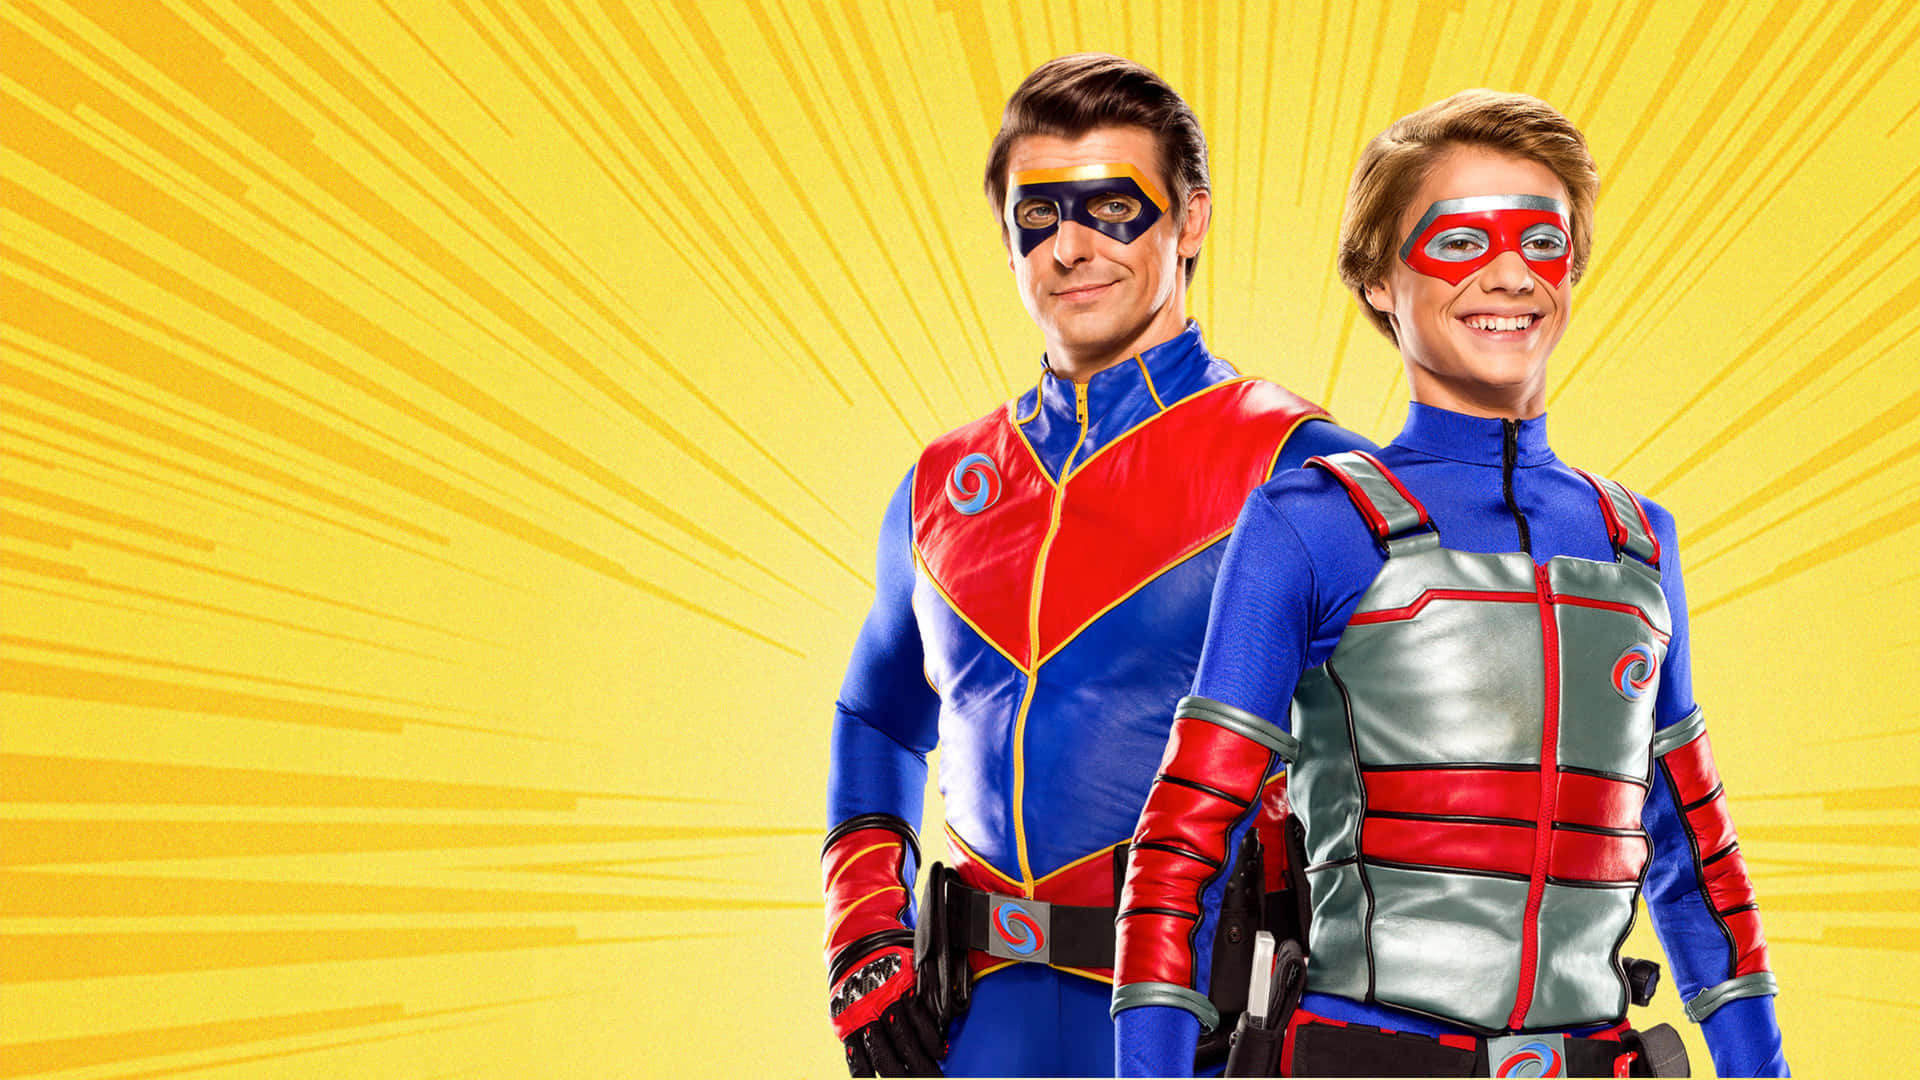 Henry Danger on his way to save the day Wallpaper